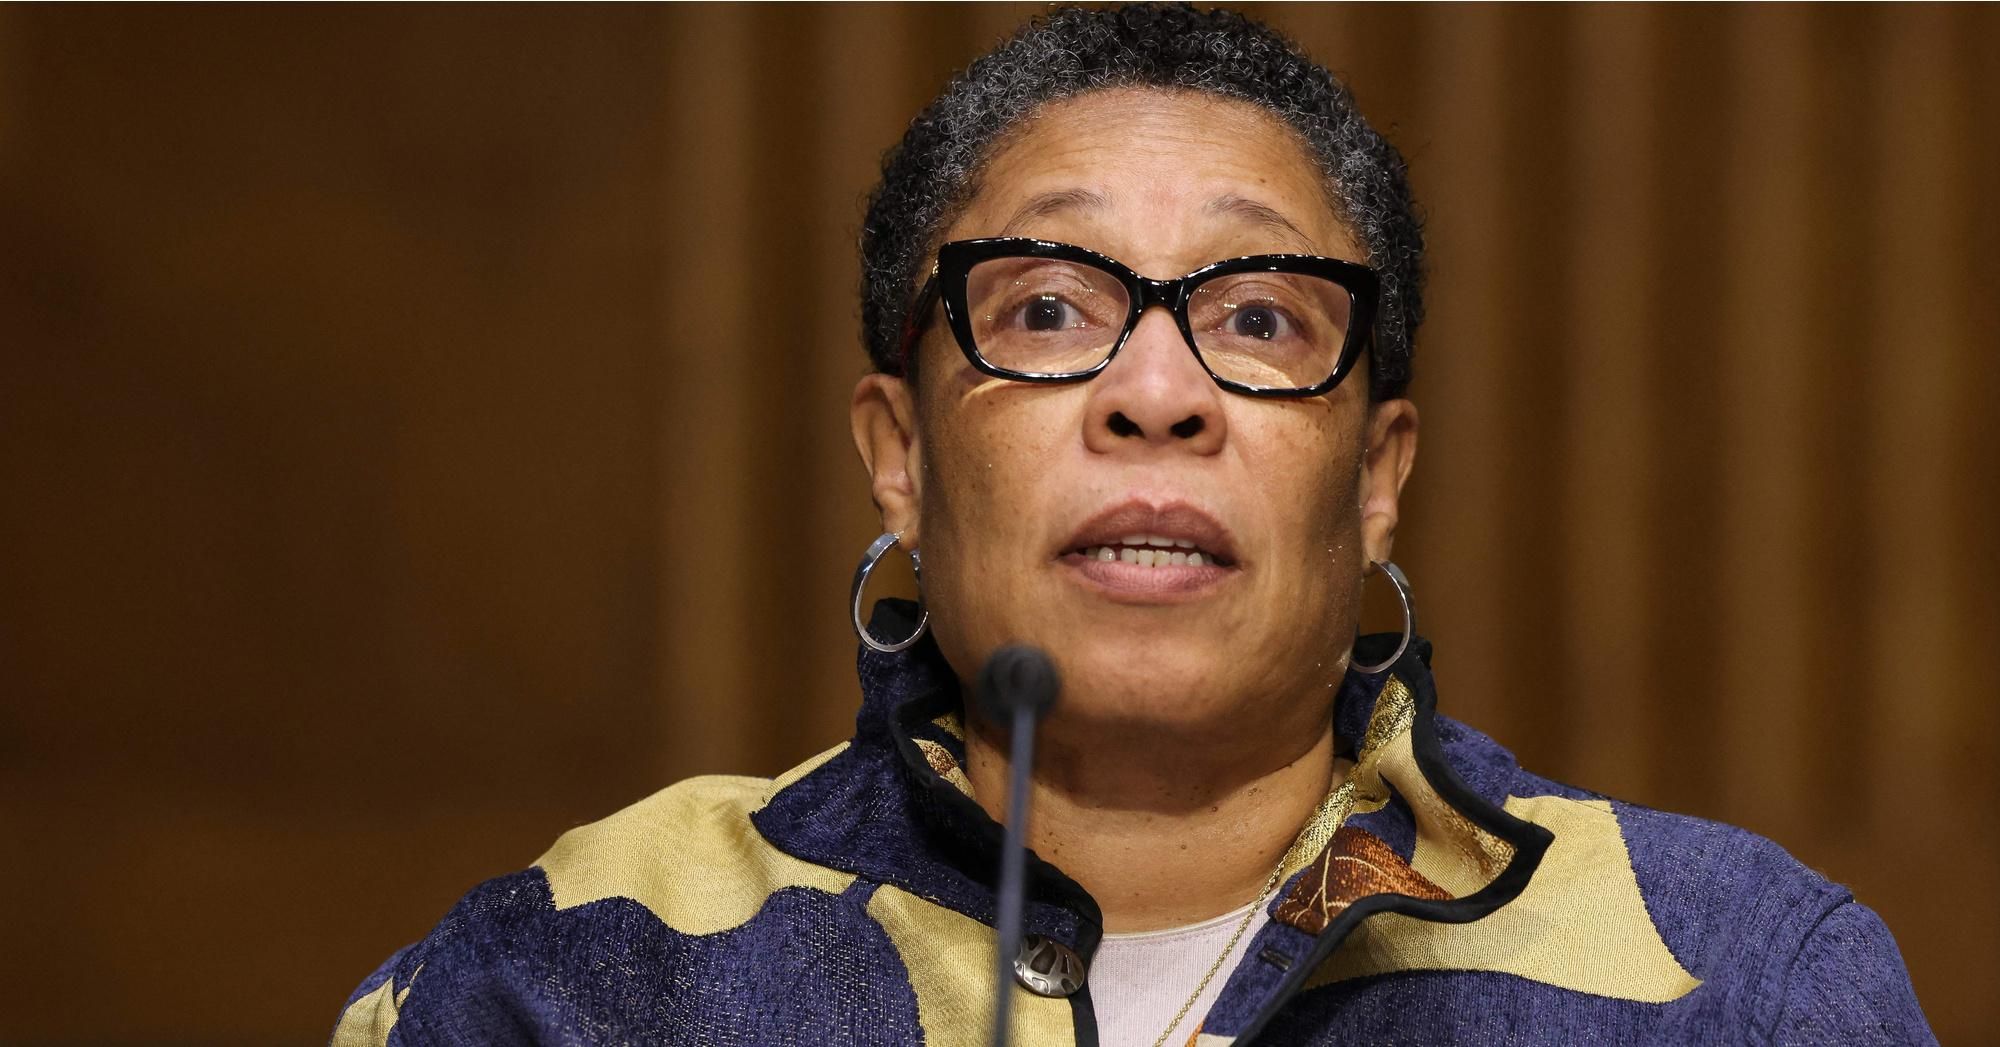 U.S. Housing and Urban Development Secretary Marcia Fudge testifies before the Senate Appropriations Committee in the Dirksen Senate Office Building on Capitol Hill on April 20, 2021 in Washington, D.C. (Photo: Oliver Contreras/Pool/Getty Images)